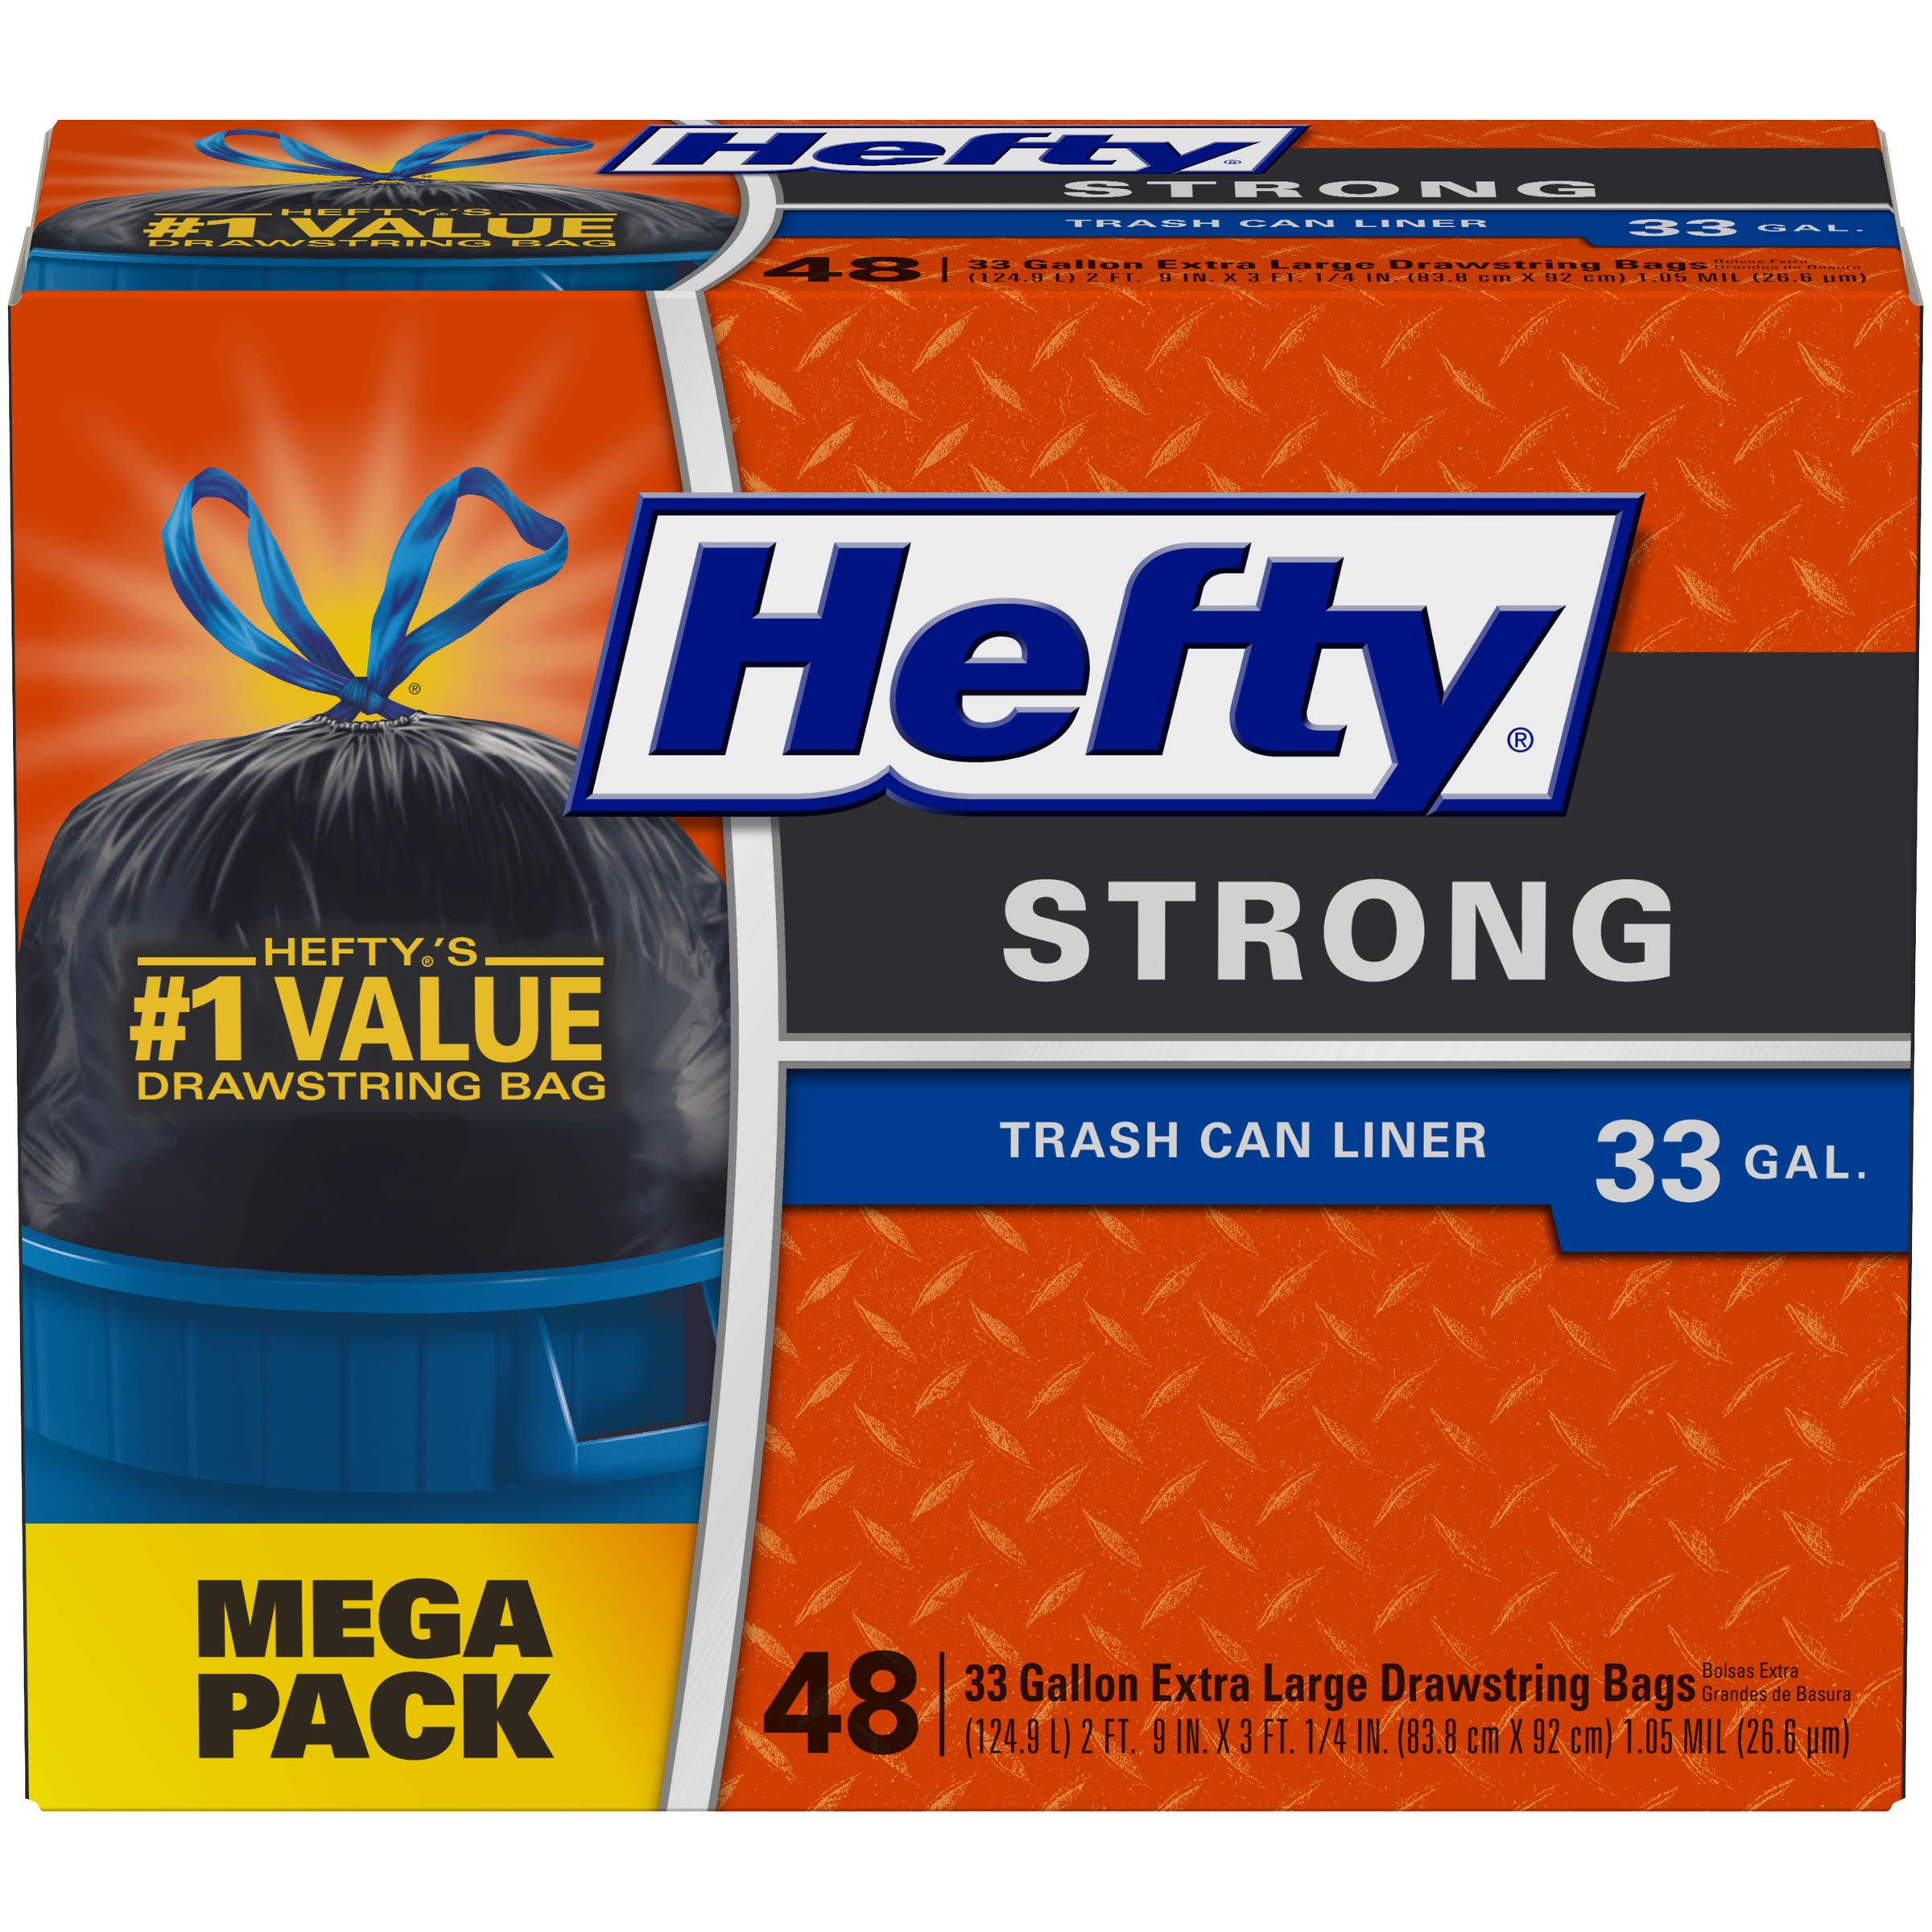 Hefty Strong Large Trash Bags, 33 Gallon, 48 Count 33 Gallon - 48 Count